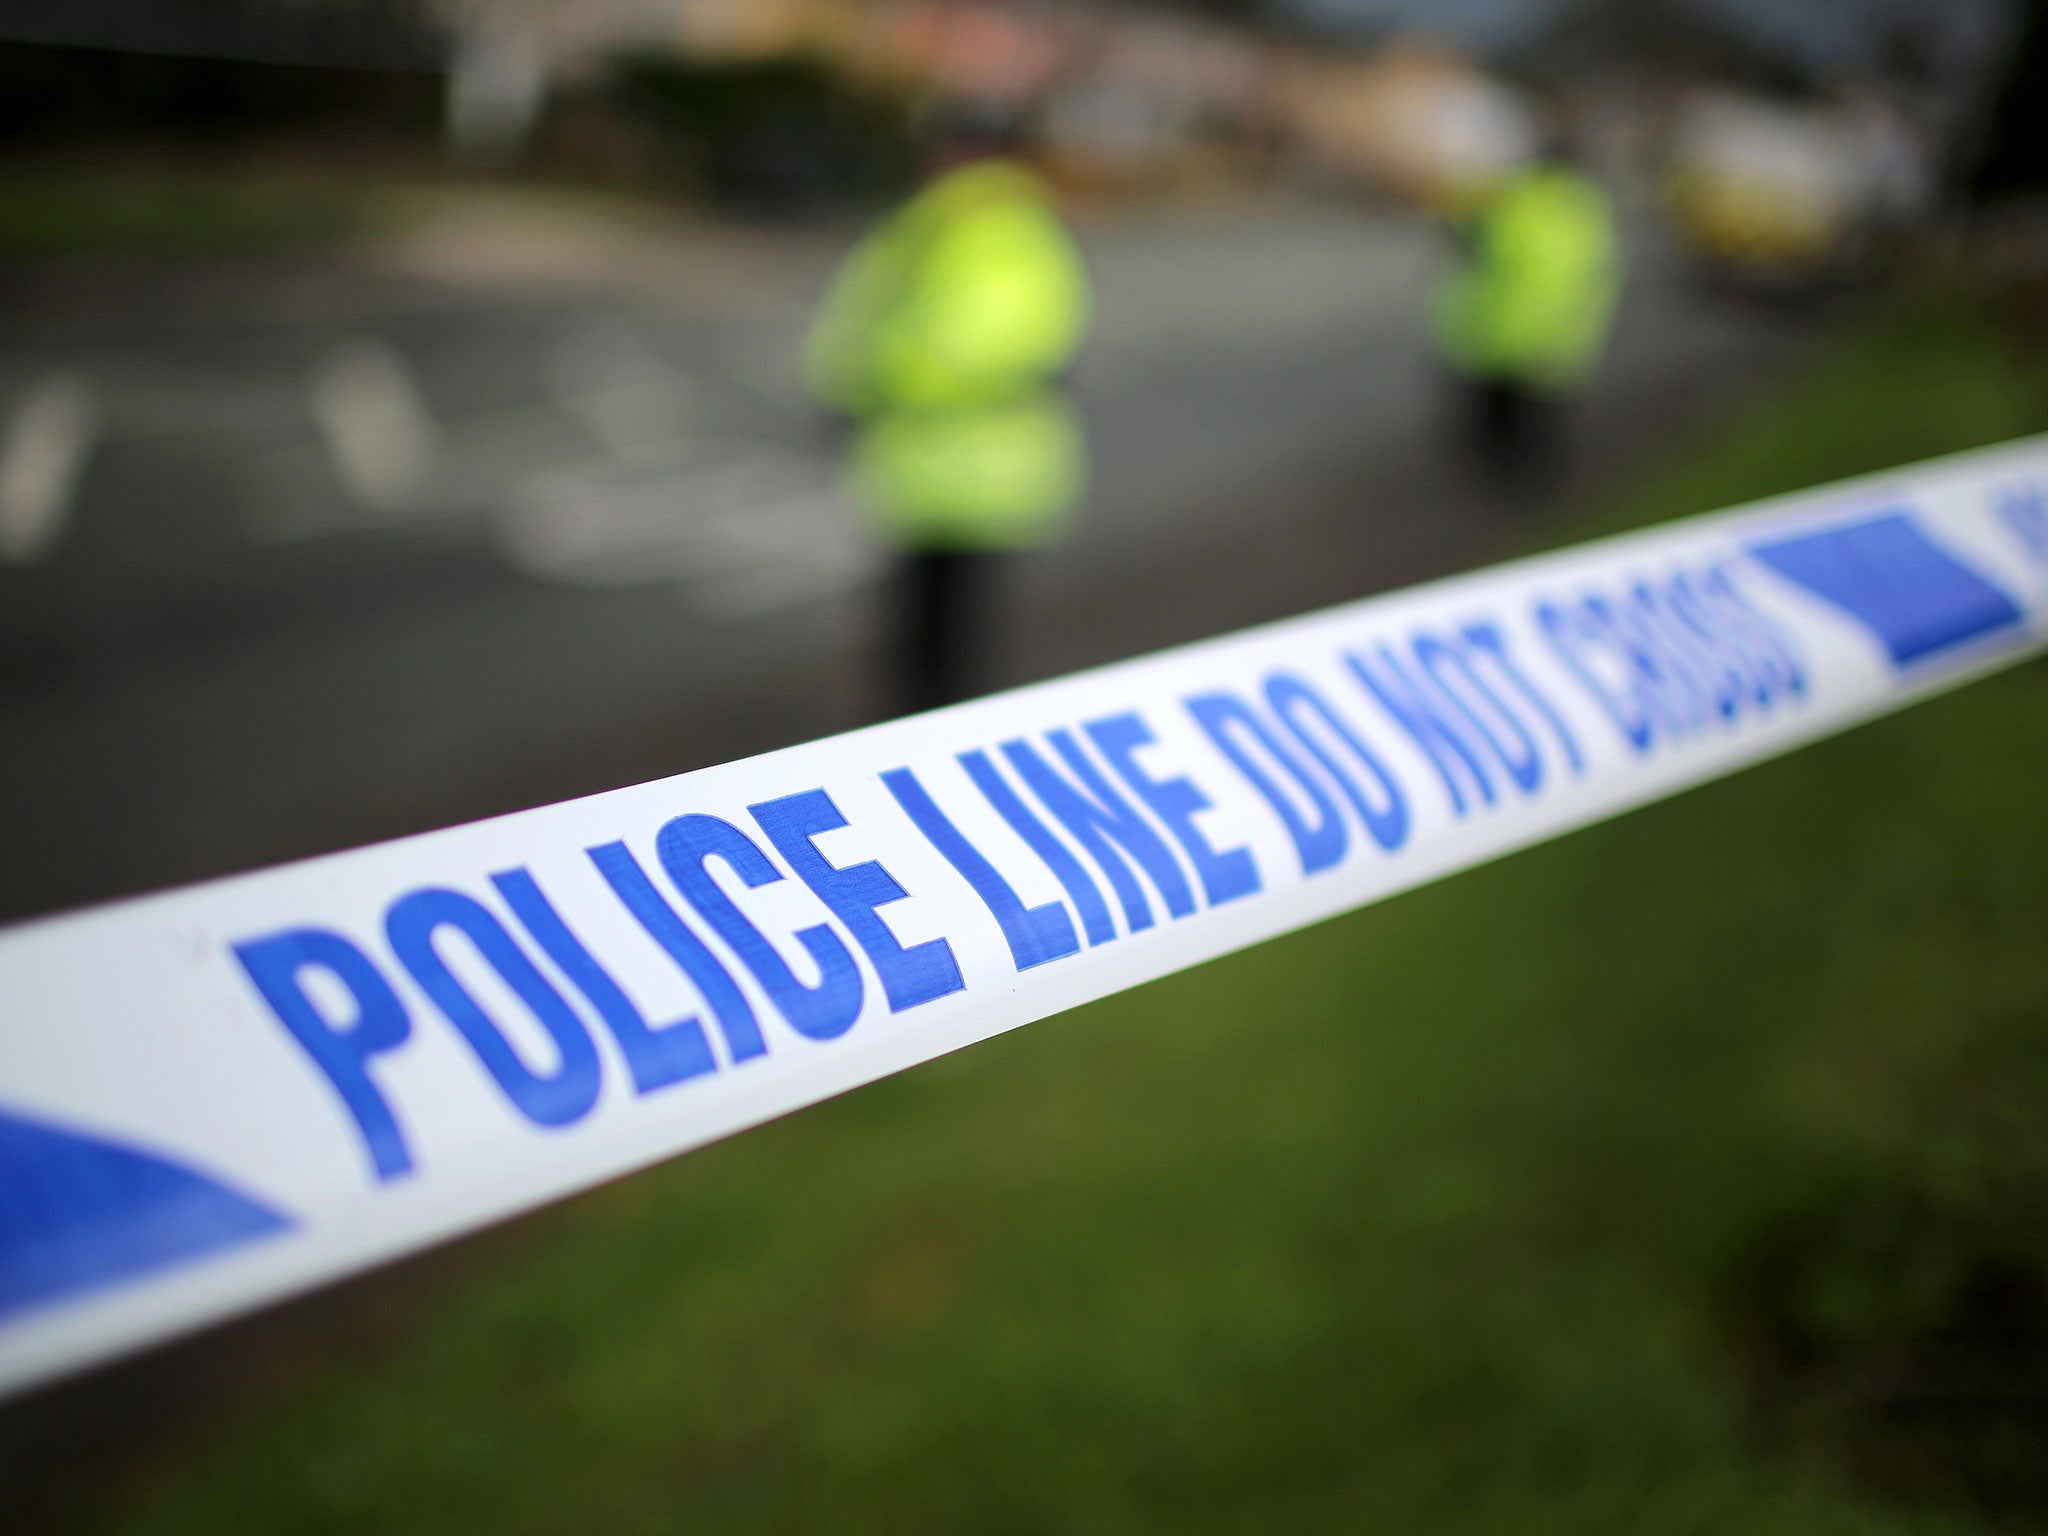 The 15-year-old is being questioned by detectives on suspicion of murder